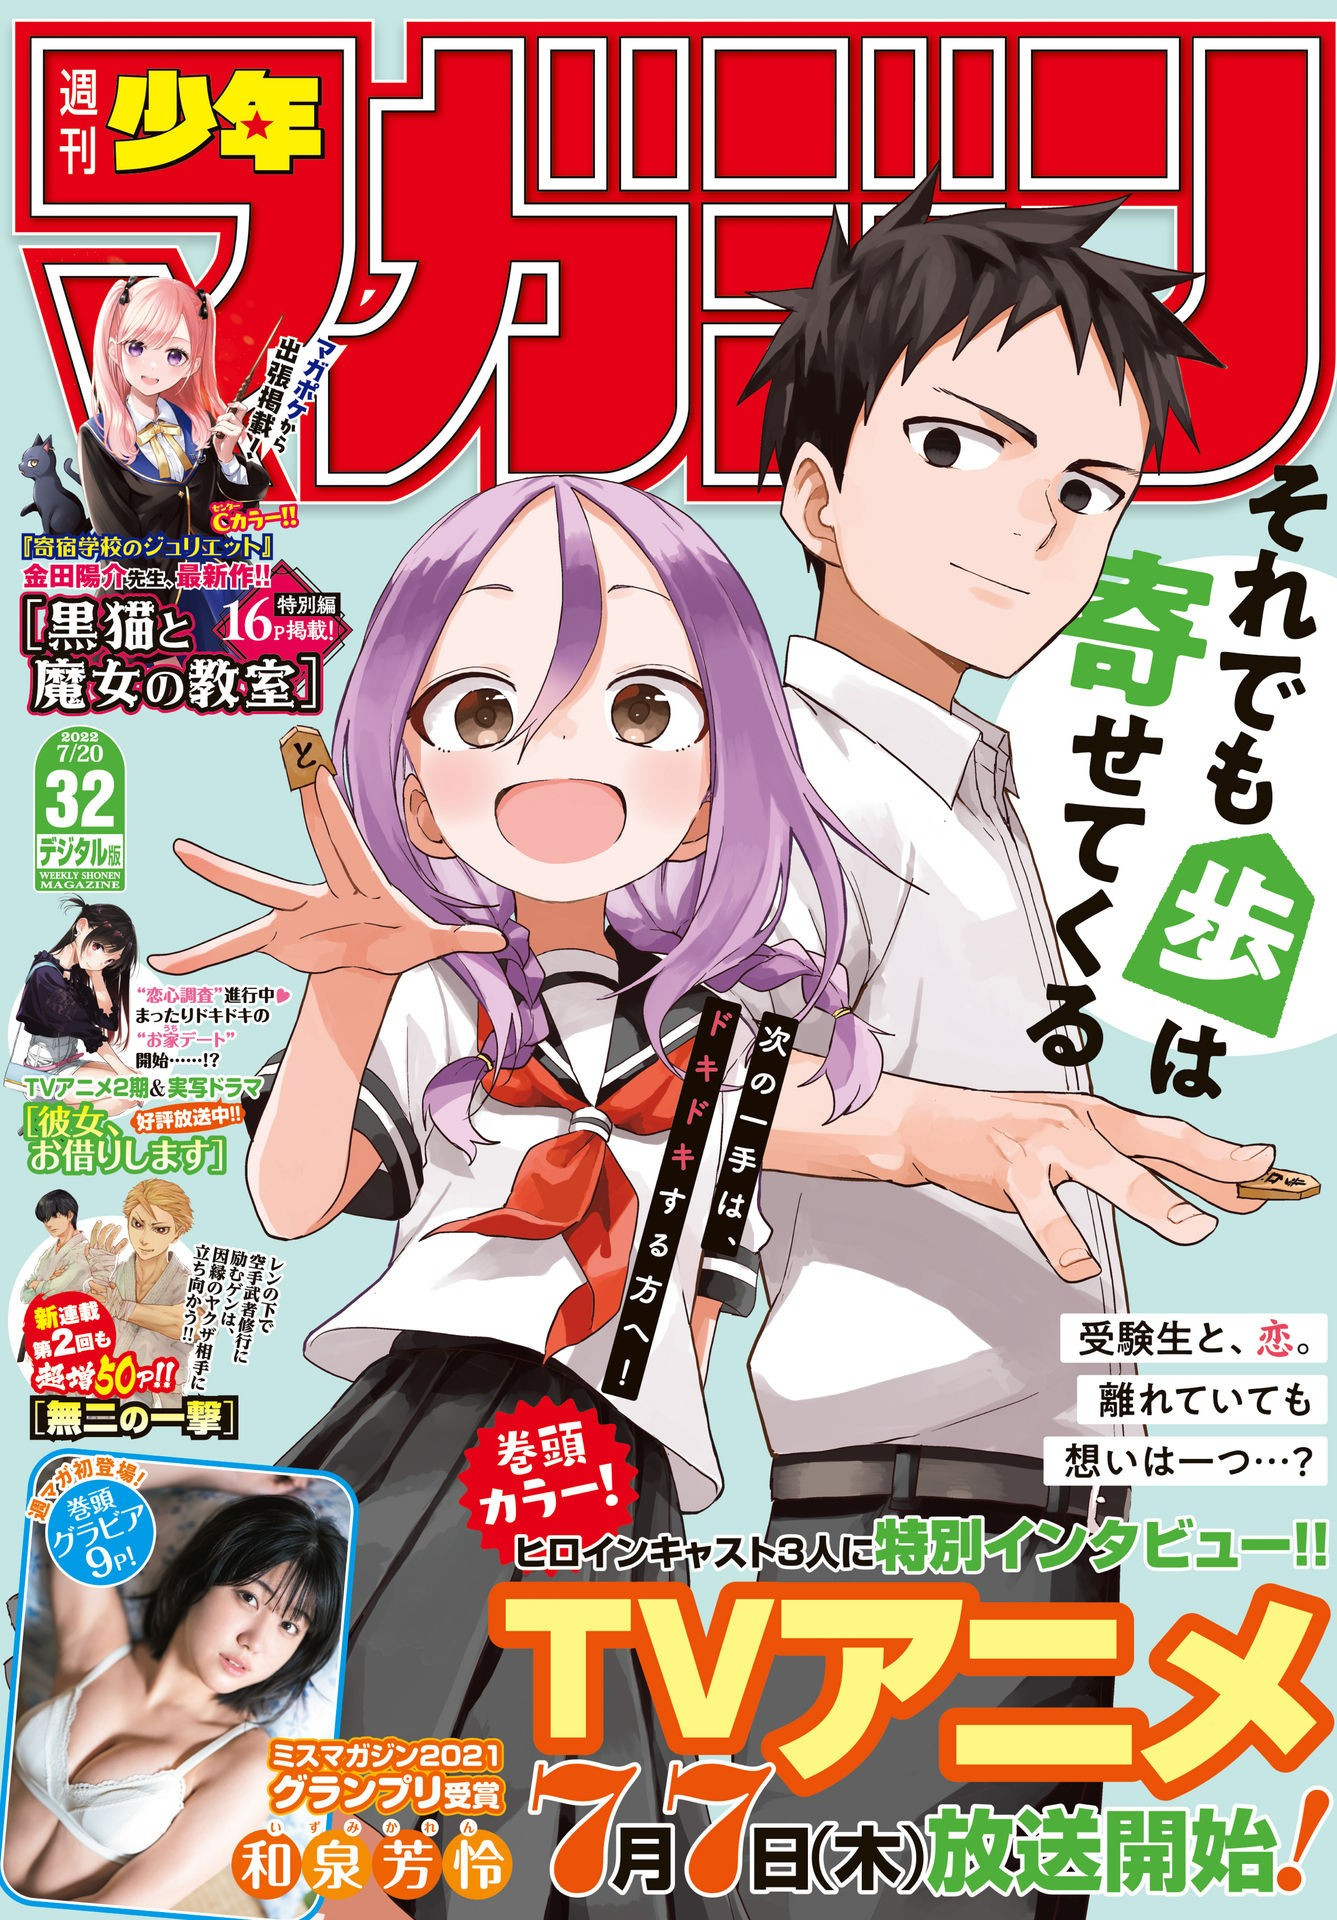 Weekly Shōnen Magazine - 週刊少年マガジン - Chapter 2022-32 - Page 1